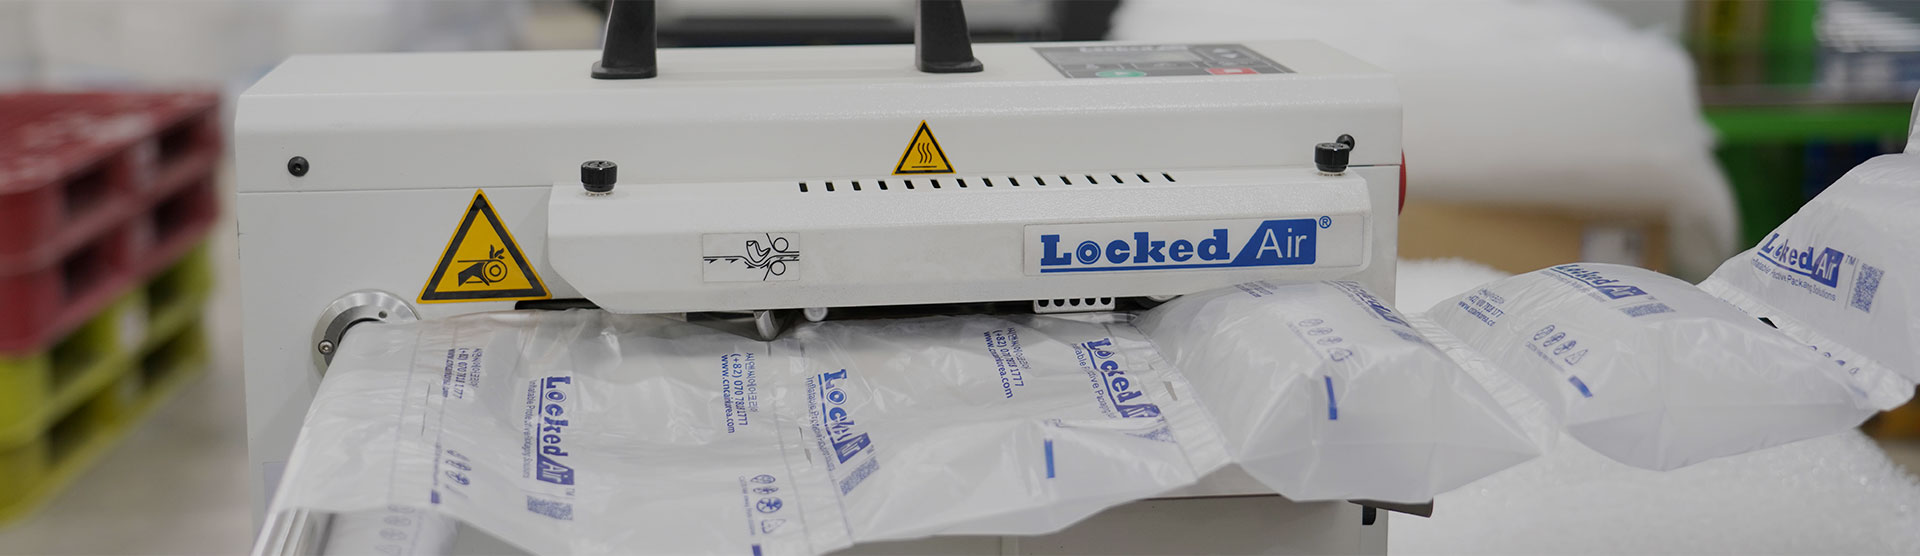 Lockedair Makes Contributions to Plastic Recycling System